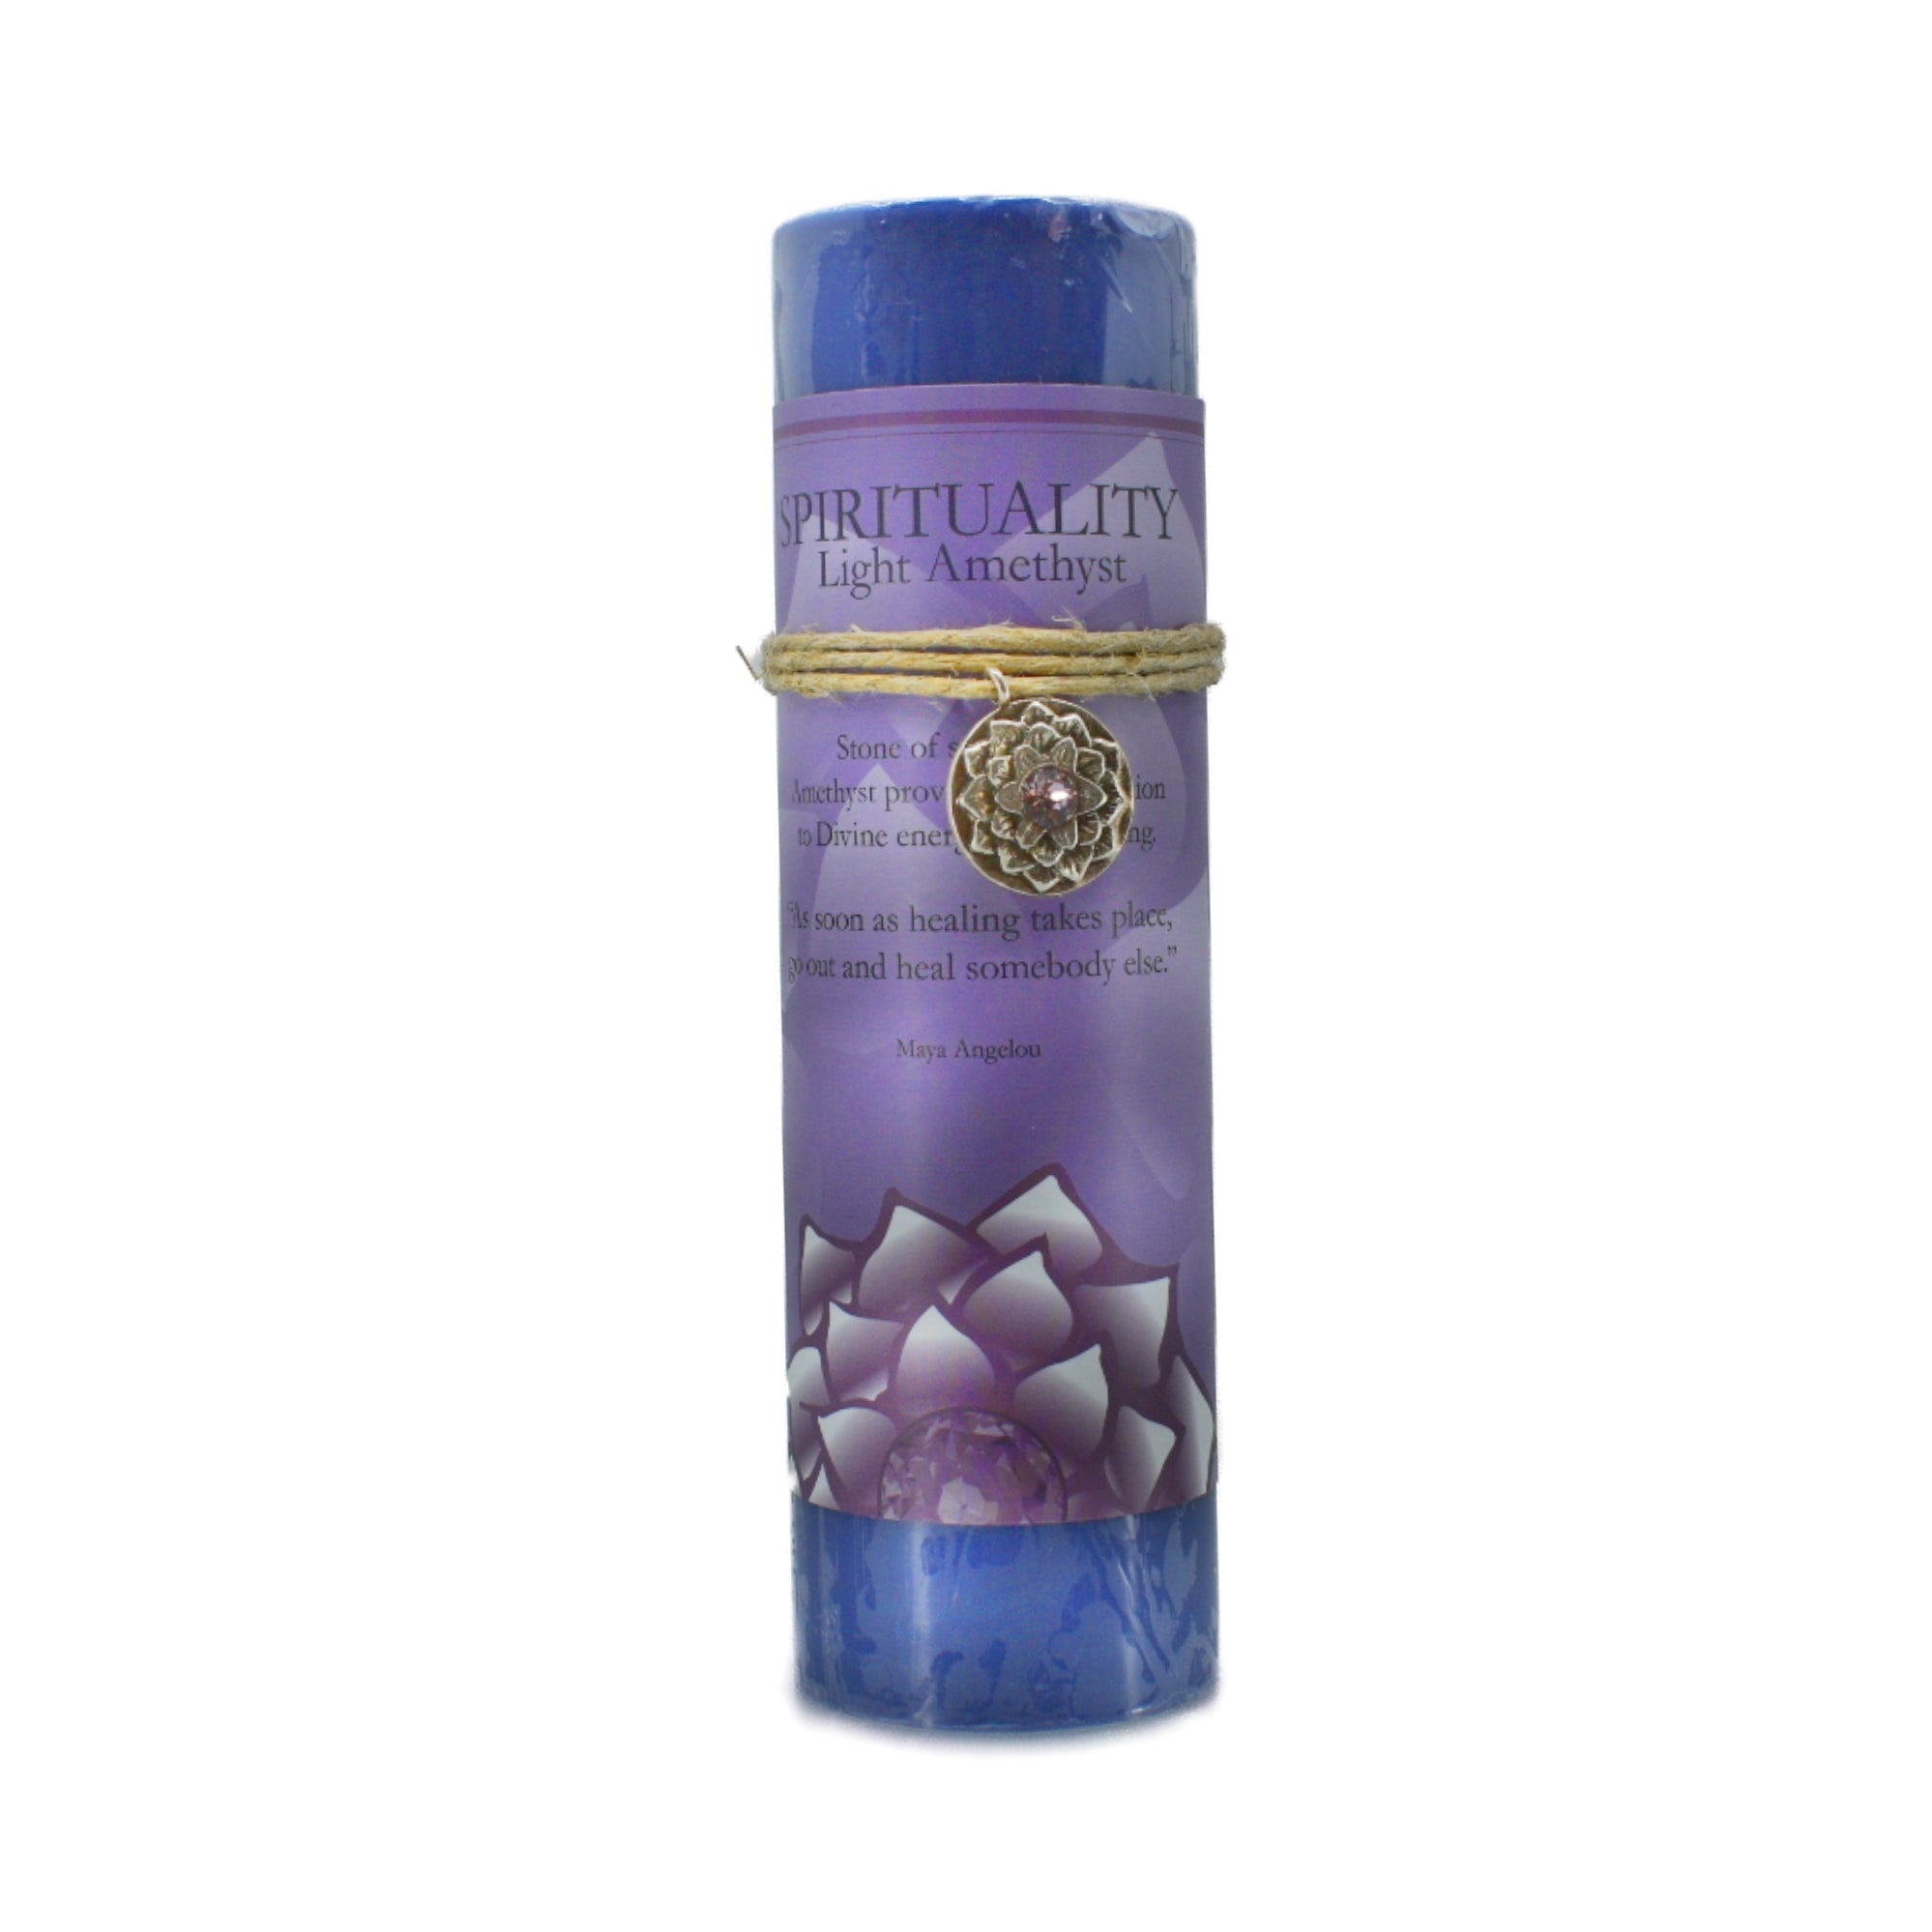 Spirituality Lotus Pendant Candle.  The pewter pendant is a lotus flower with a light amethyst center.  Amethyst promotes intellectual thought and is a blessing to your life.  It helps to eliminate impatience and help find inner peace.  It also help you on the path of spirituality.  It is a purplish blue candle.